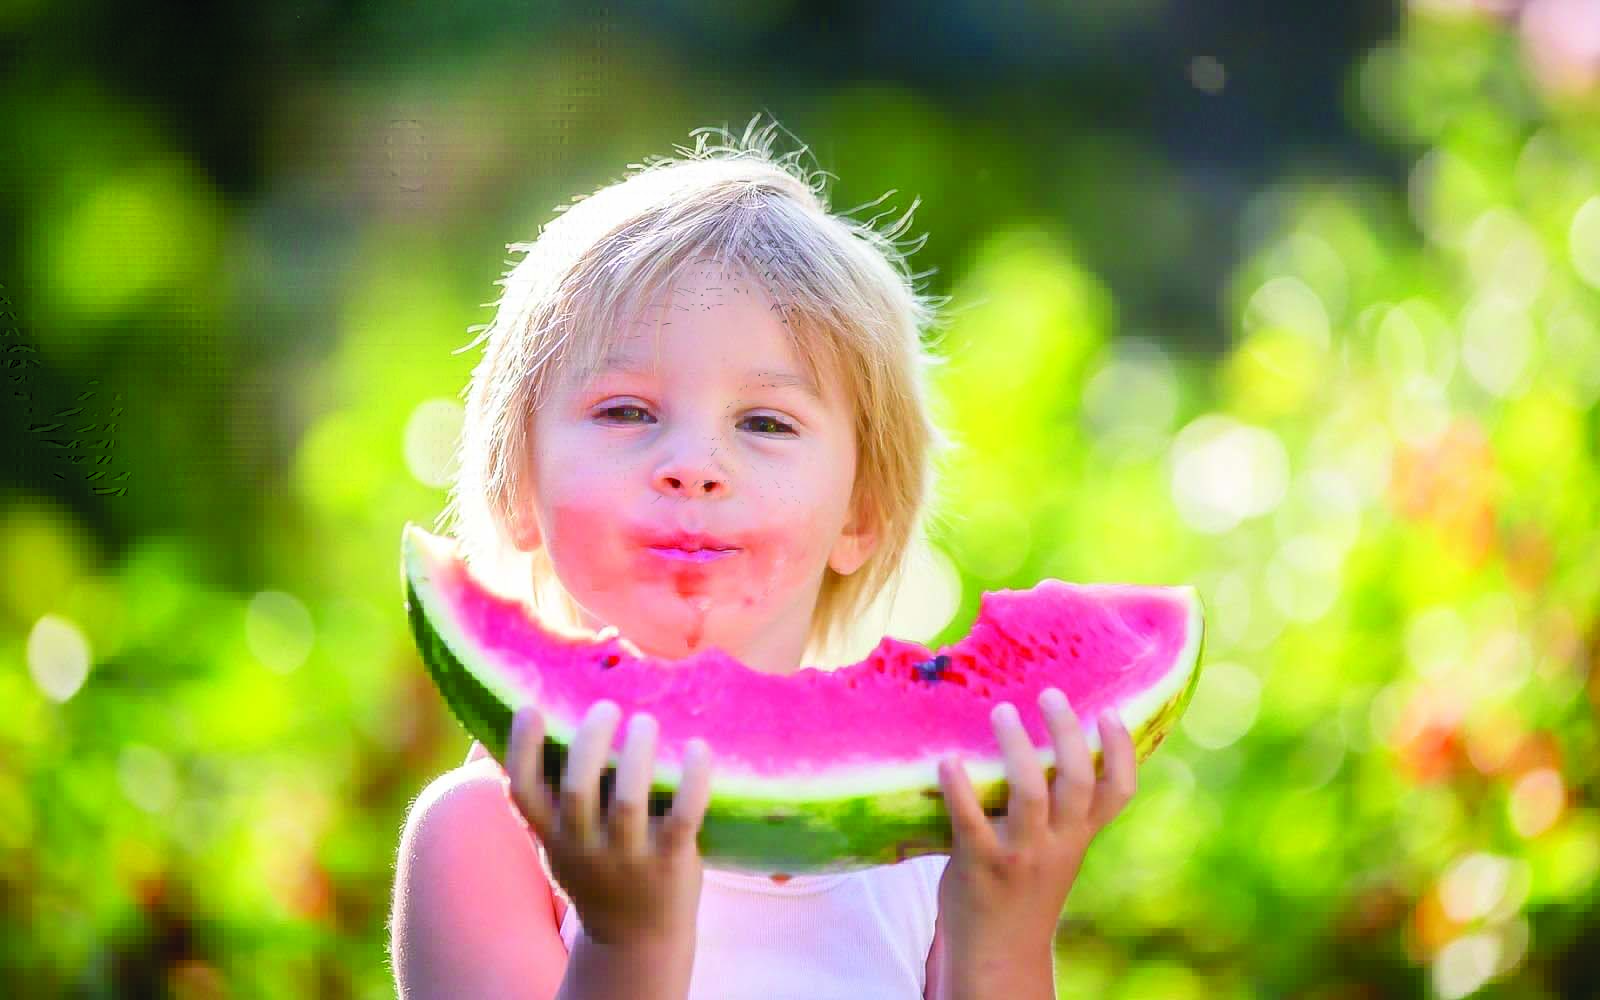 Sweet Summer Bliss: Why Watermelon Reigns Supreme as the Ultimate Fruit Choice